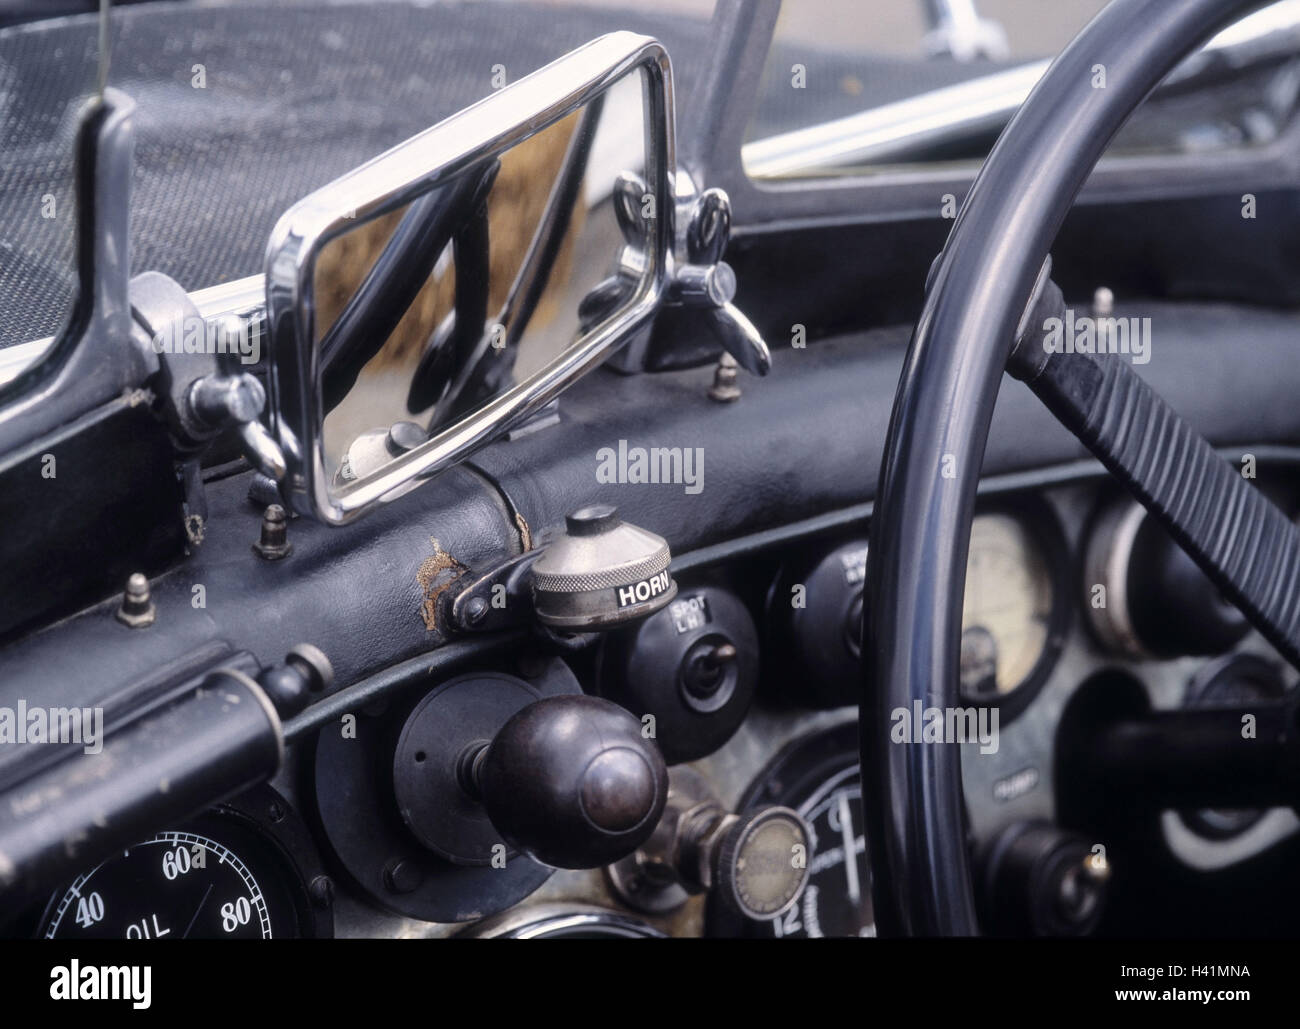 Car, old-timer, cockpit, detail, dash board, rear-view mirror, tax vehicle, passenger car, old, nostalgically, in an old-fashioned way, nostalgia, inside, windscreen, armatures, steering, spoke tax, display, switch, lever, function, regulator, sliding-sle Stock Photo